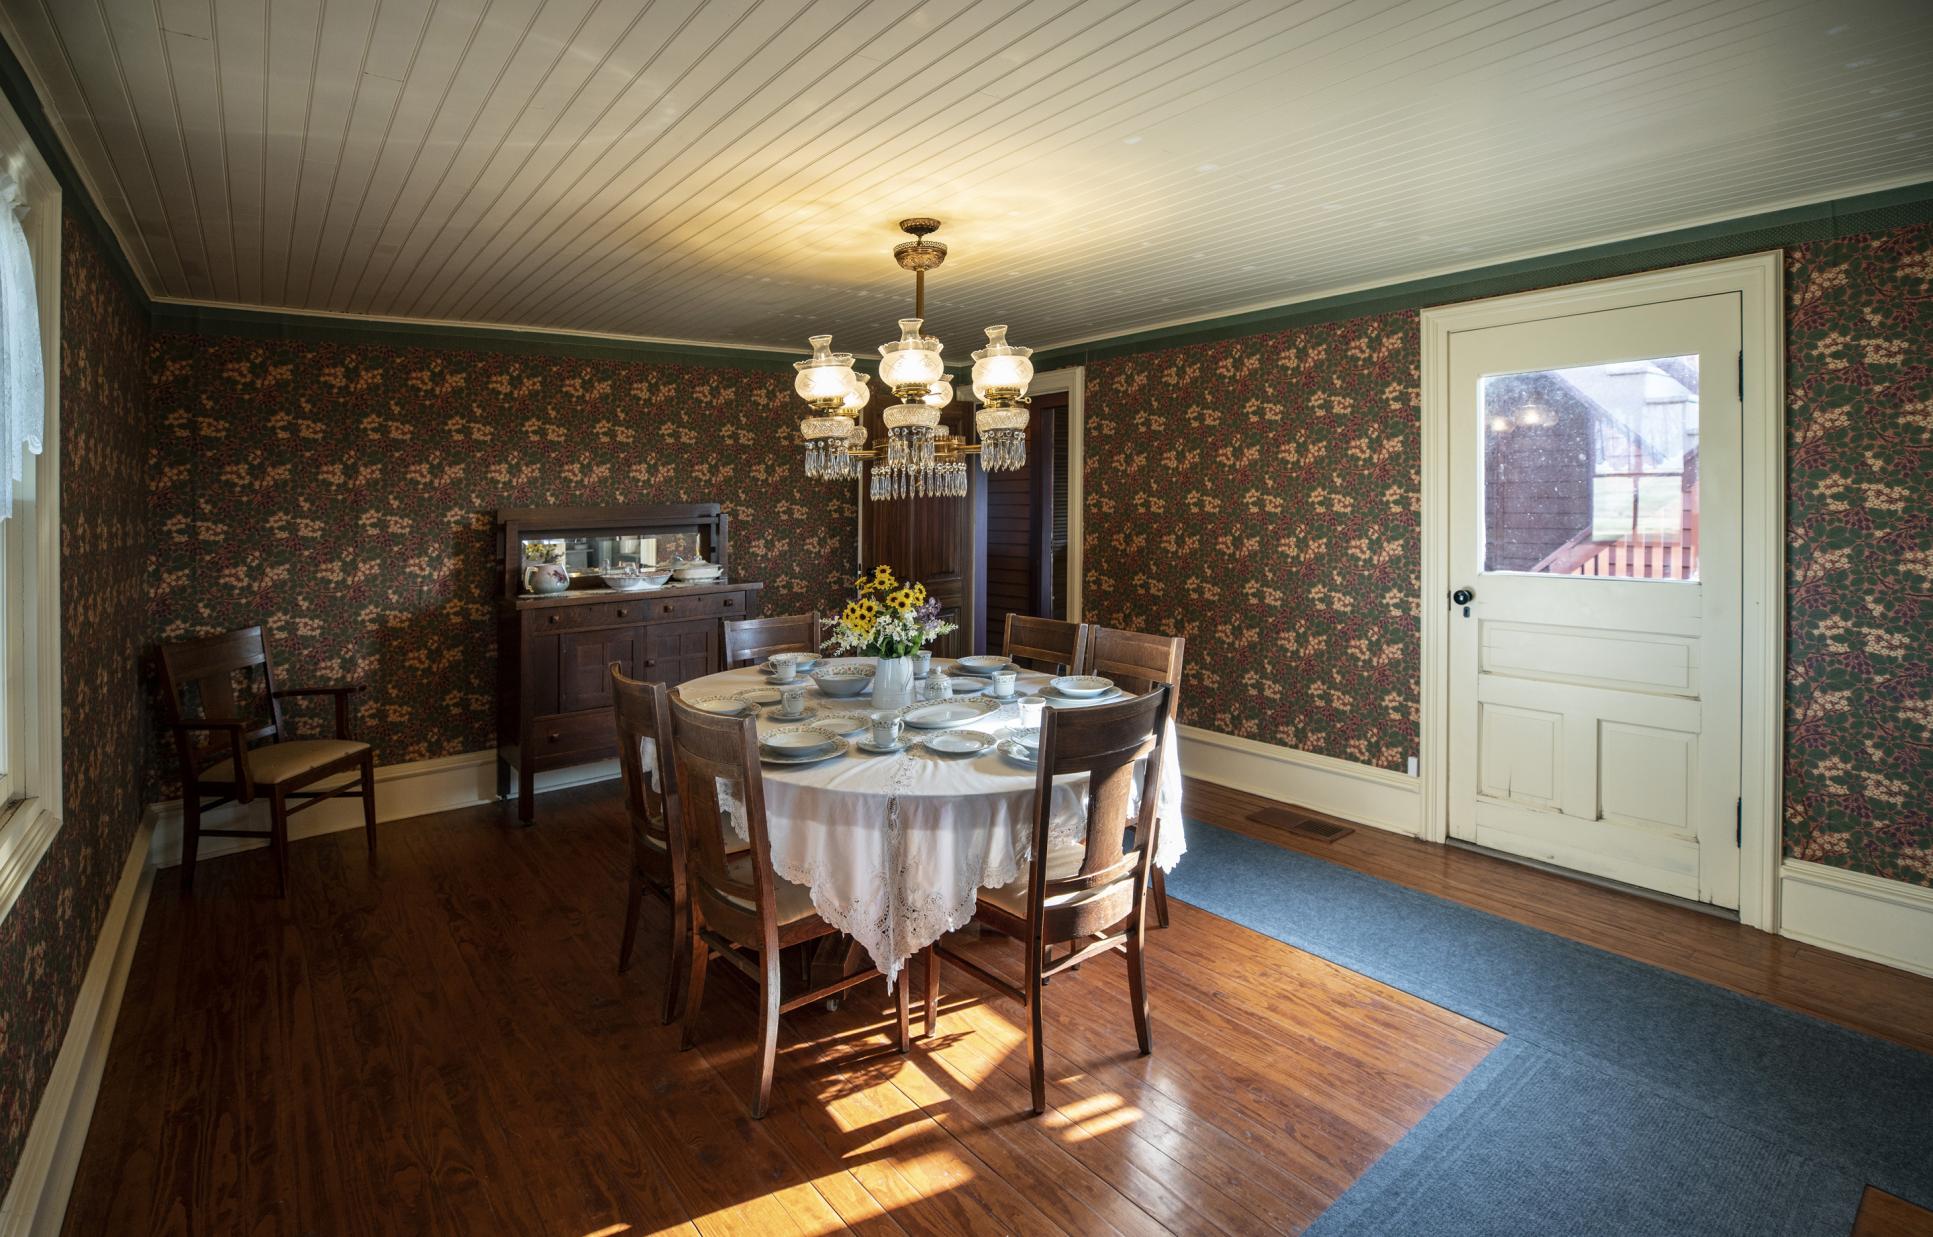 Dining room of the main ranch house